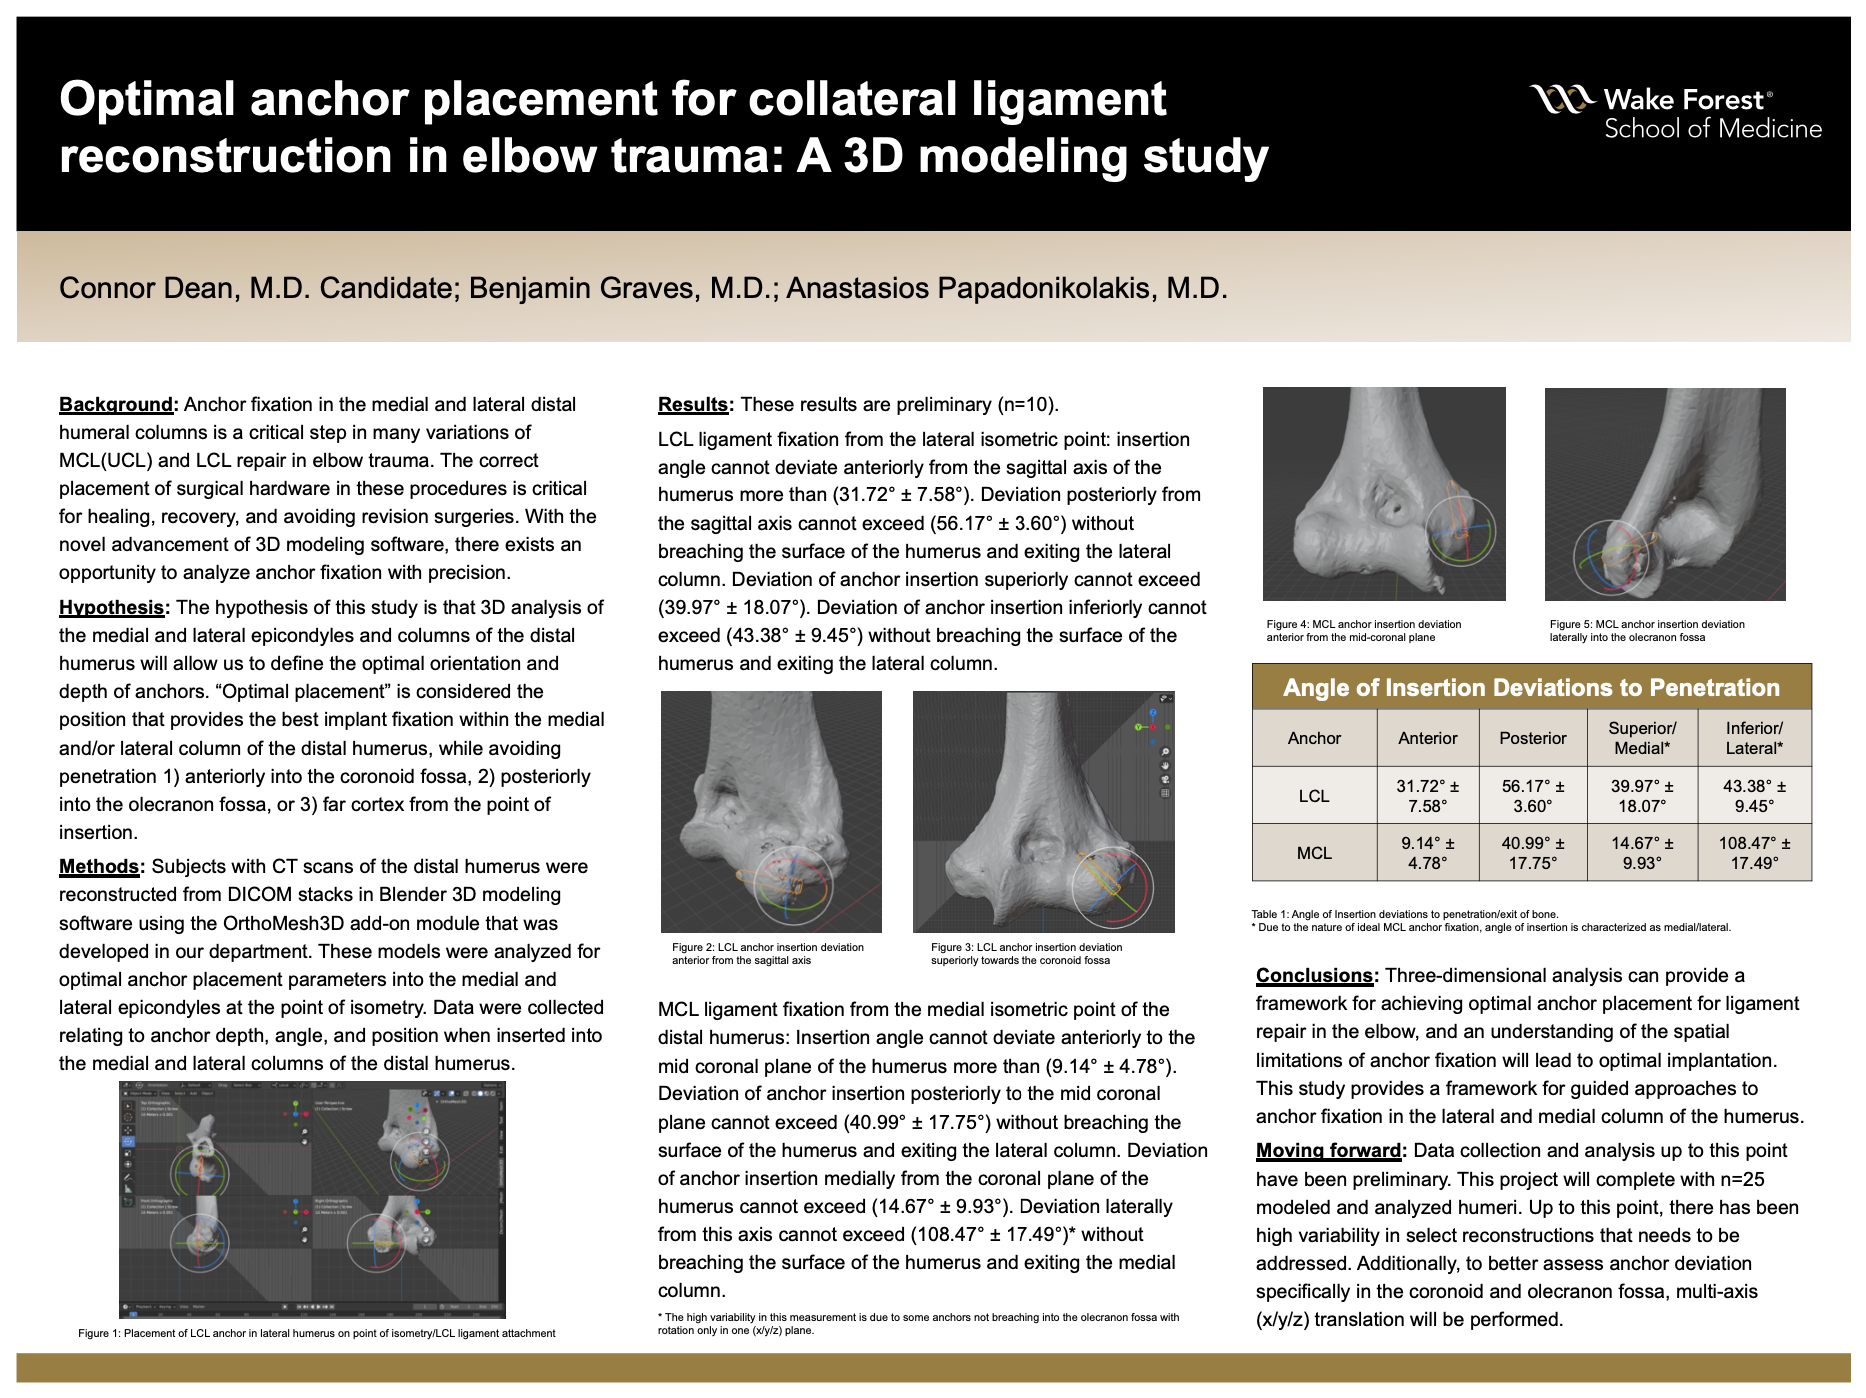 Showcase Image for Optimal anchor placement for collateral ligament reconstruction in elbow trauma- A 3D modeling study